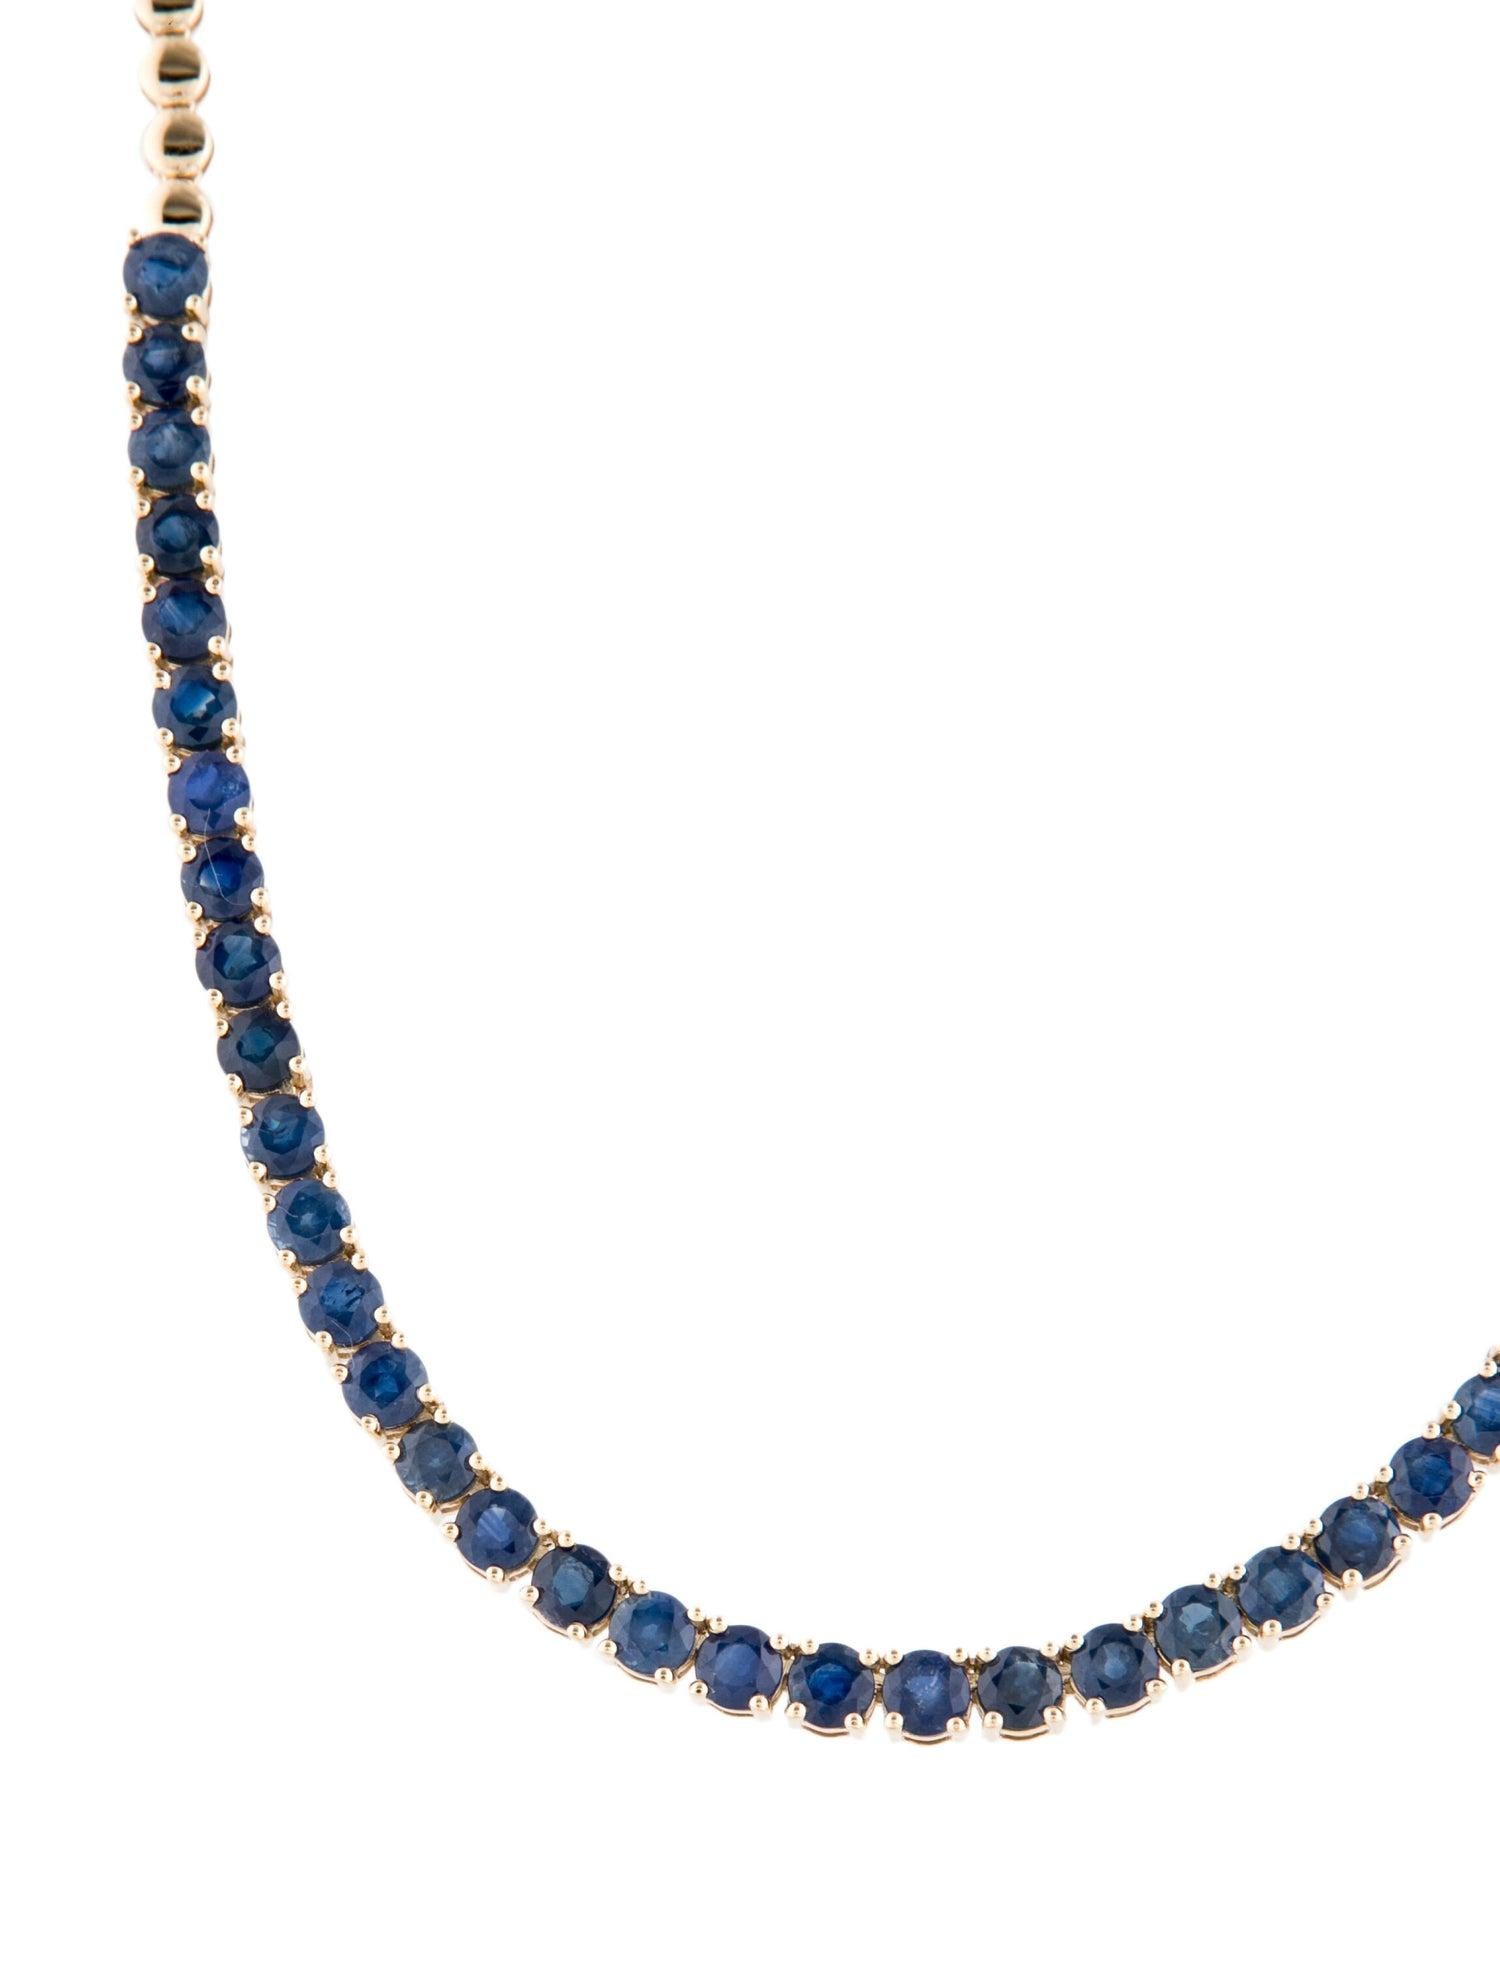 Brilliant Cut 14K Sapphire Chain Necklace 18.45ctw  Elegant Statement Jewelry for Luxe Style For Sale